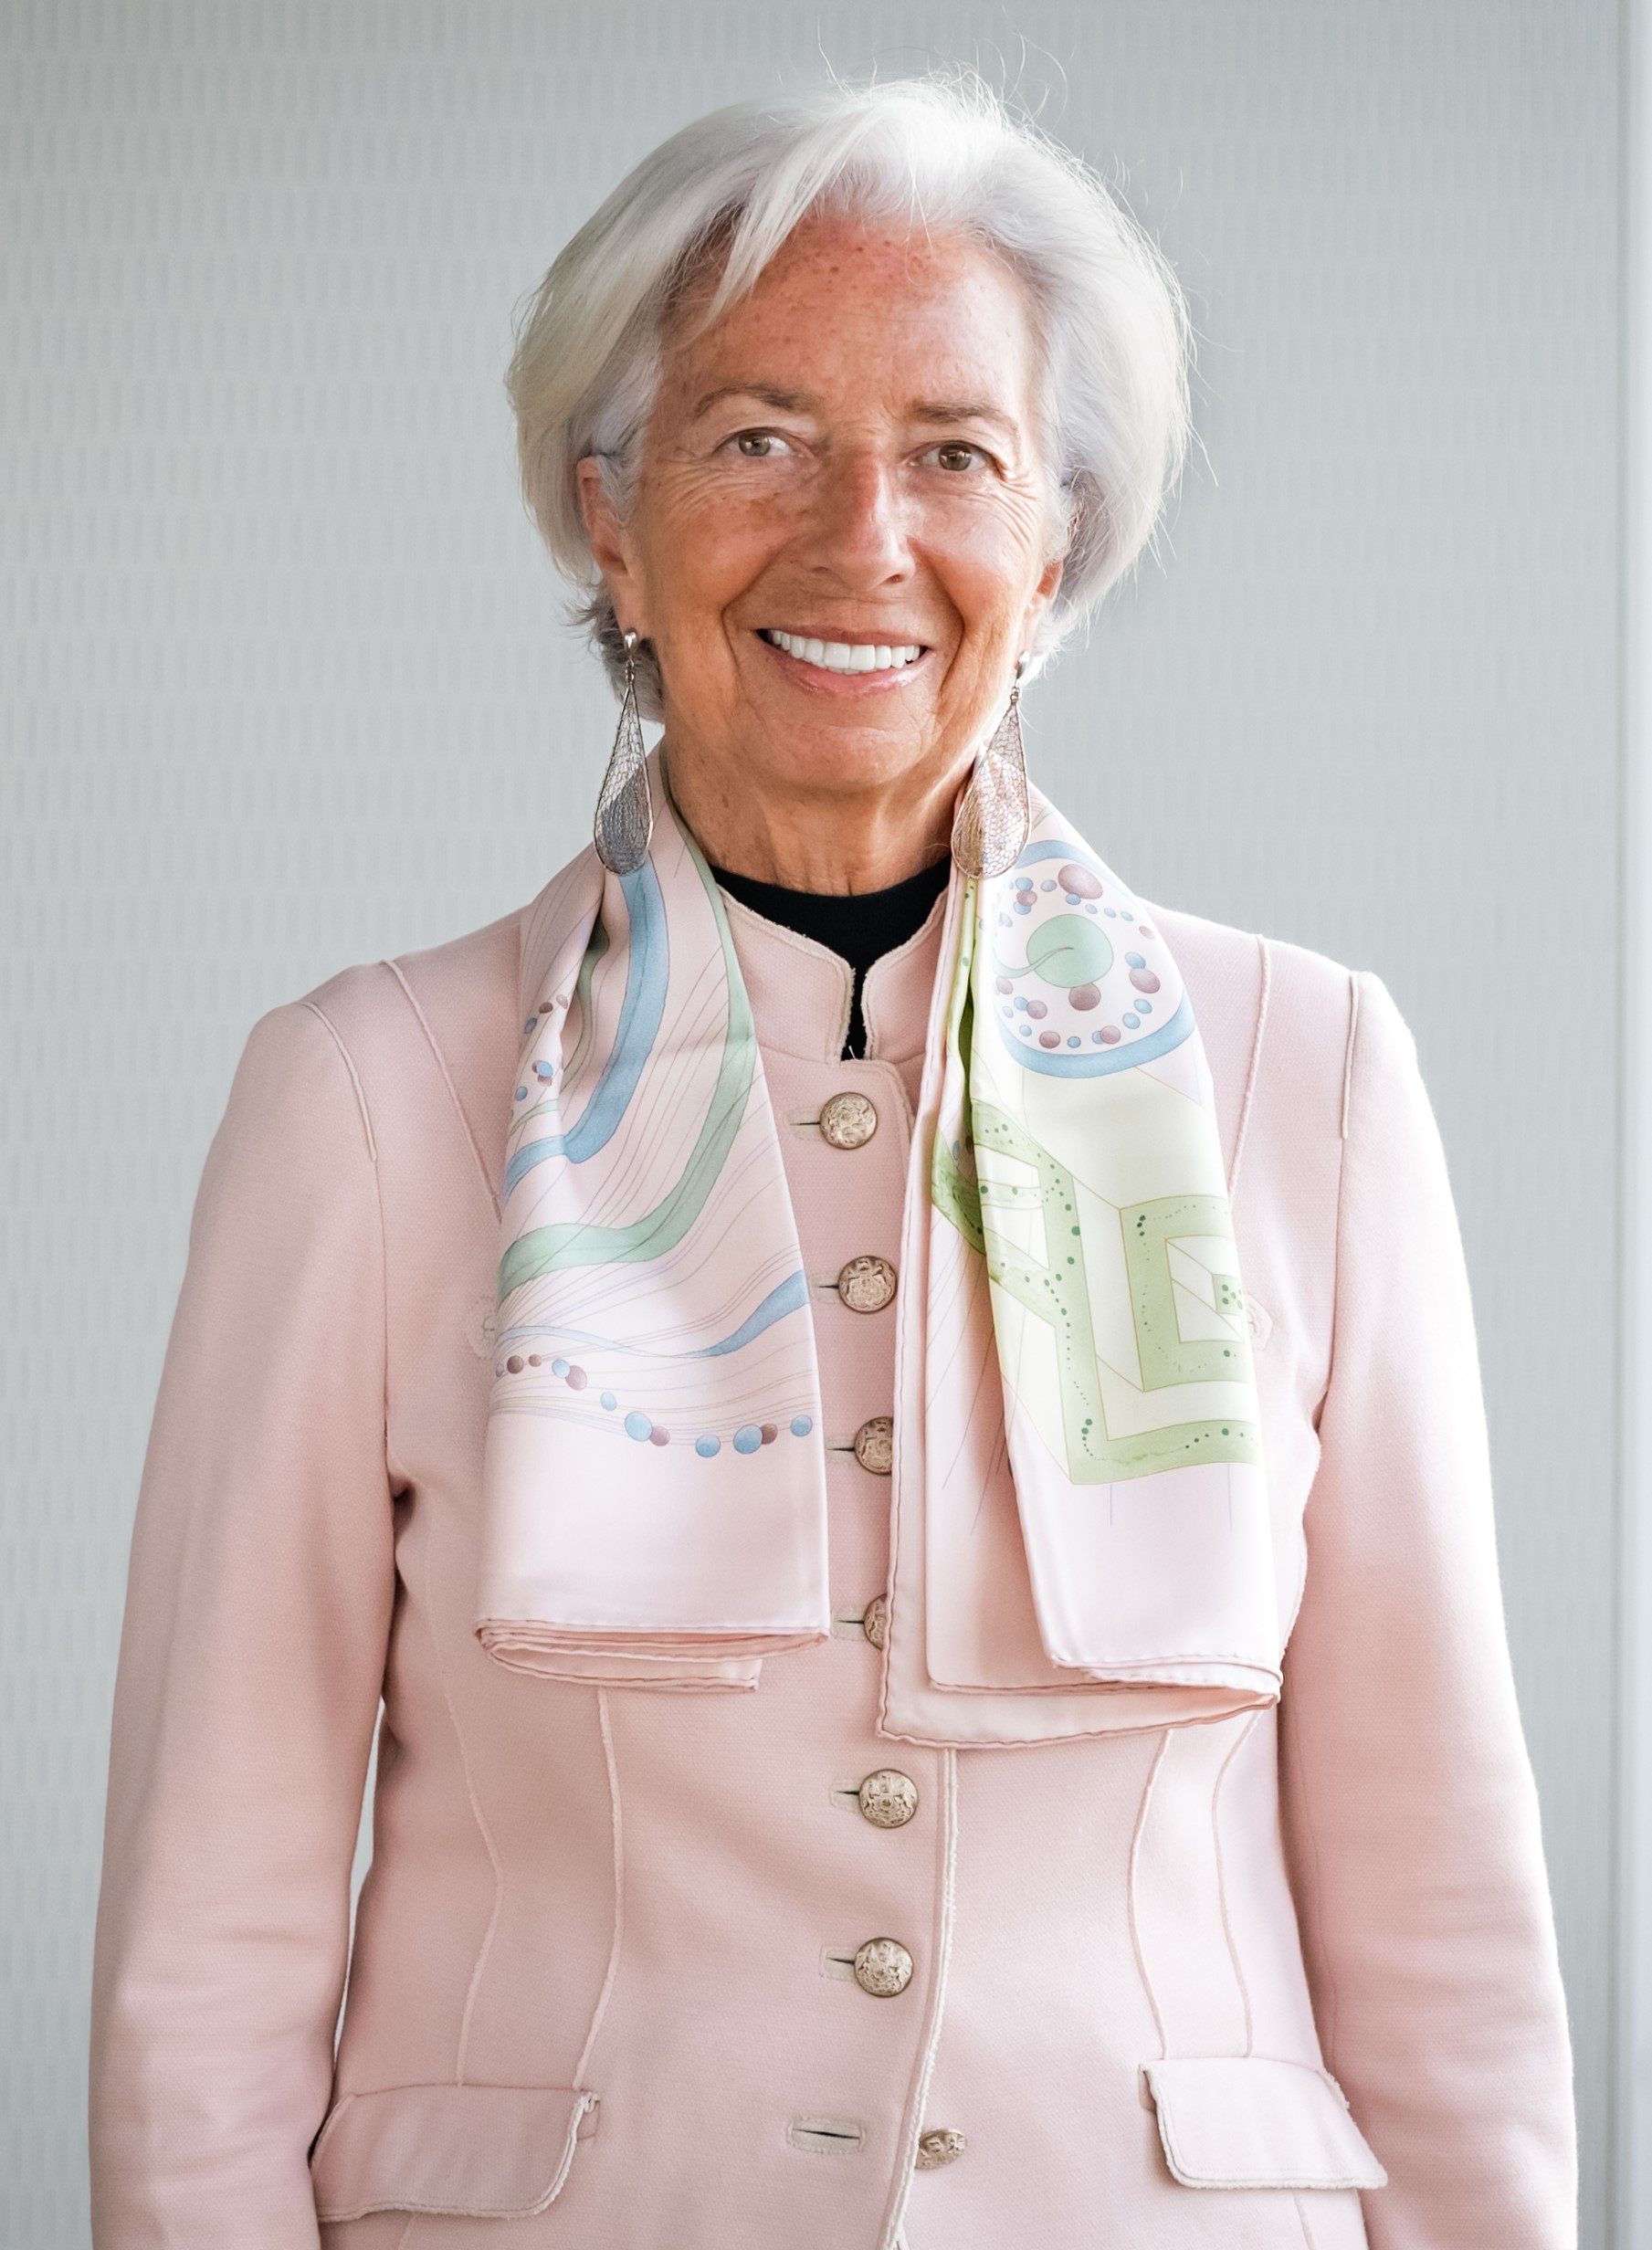 A person wearing a pink jacket and scarf

Description automatically generated